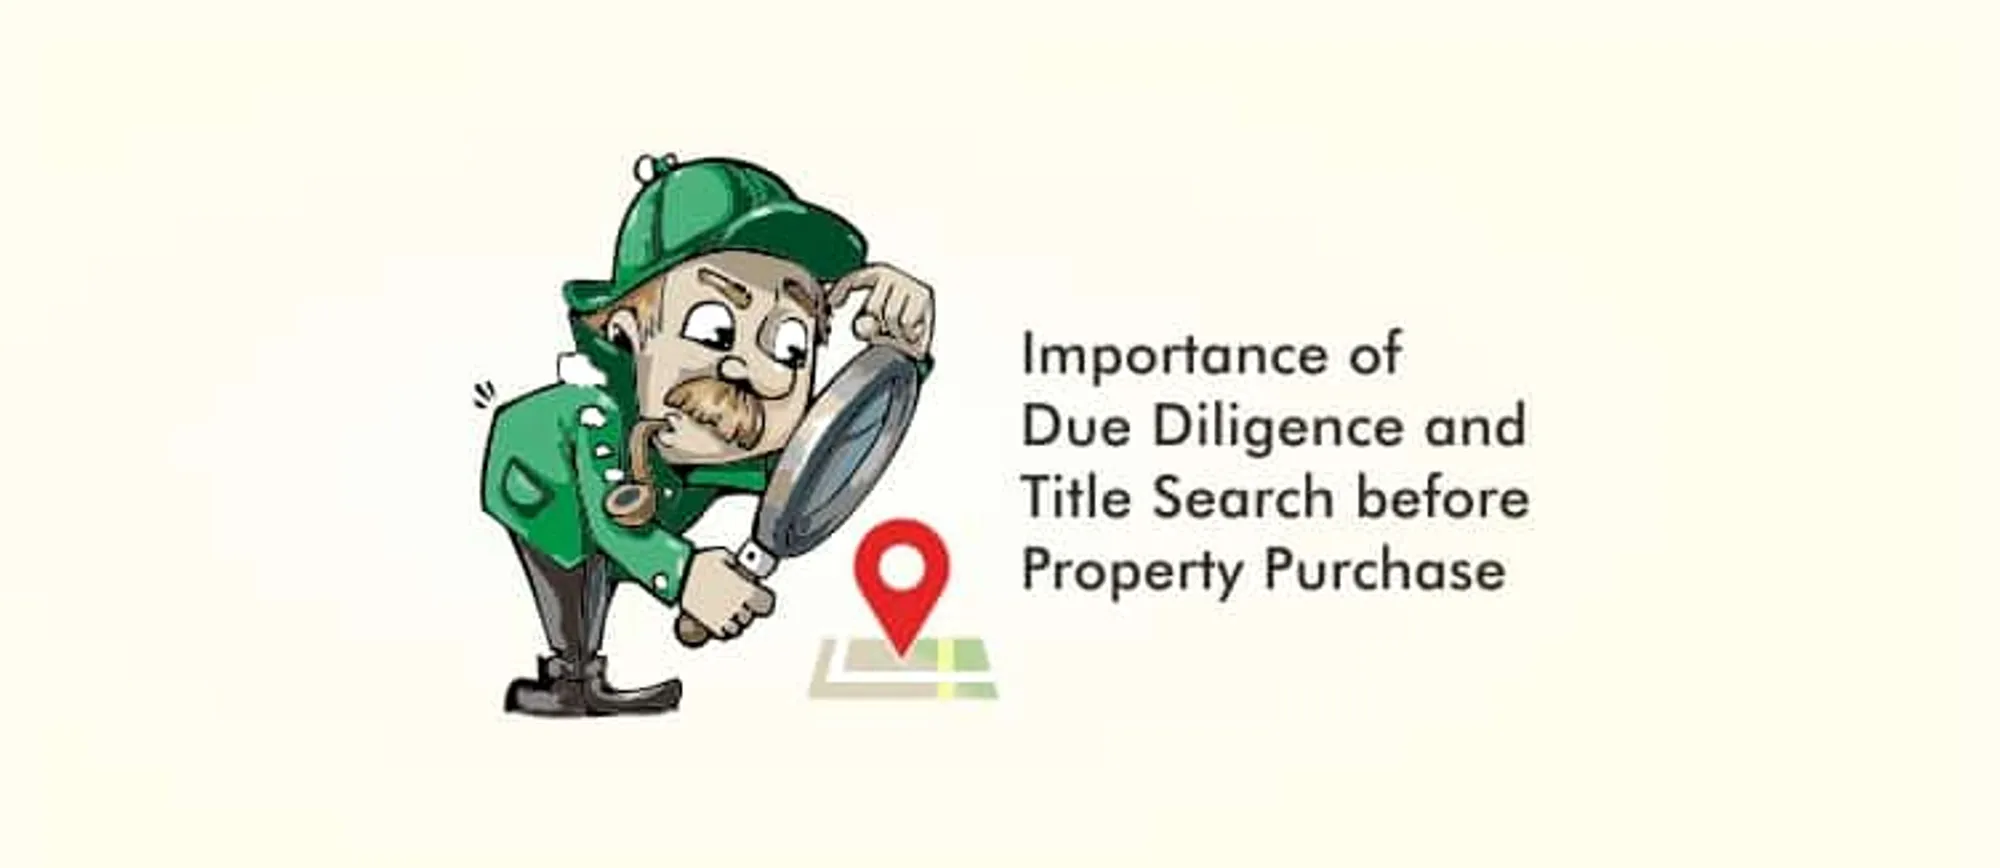 Importance of Due Diligence and Title Search before Property Purchase